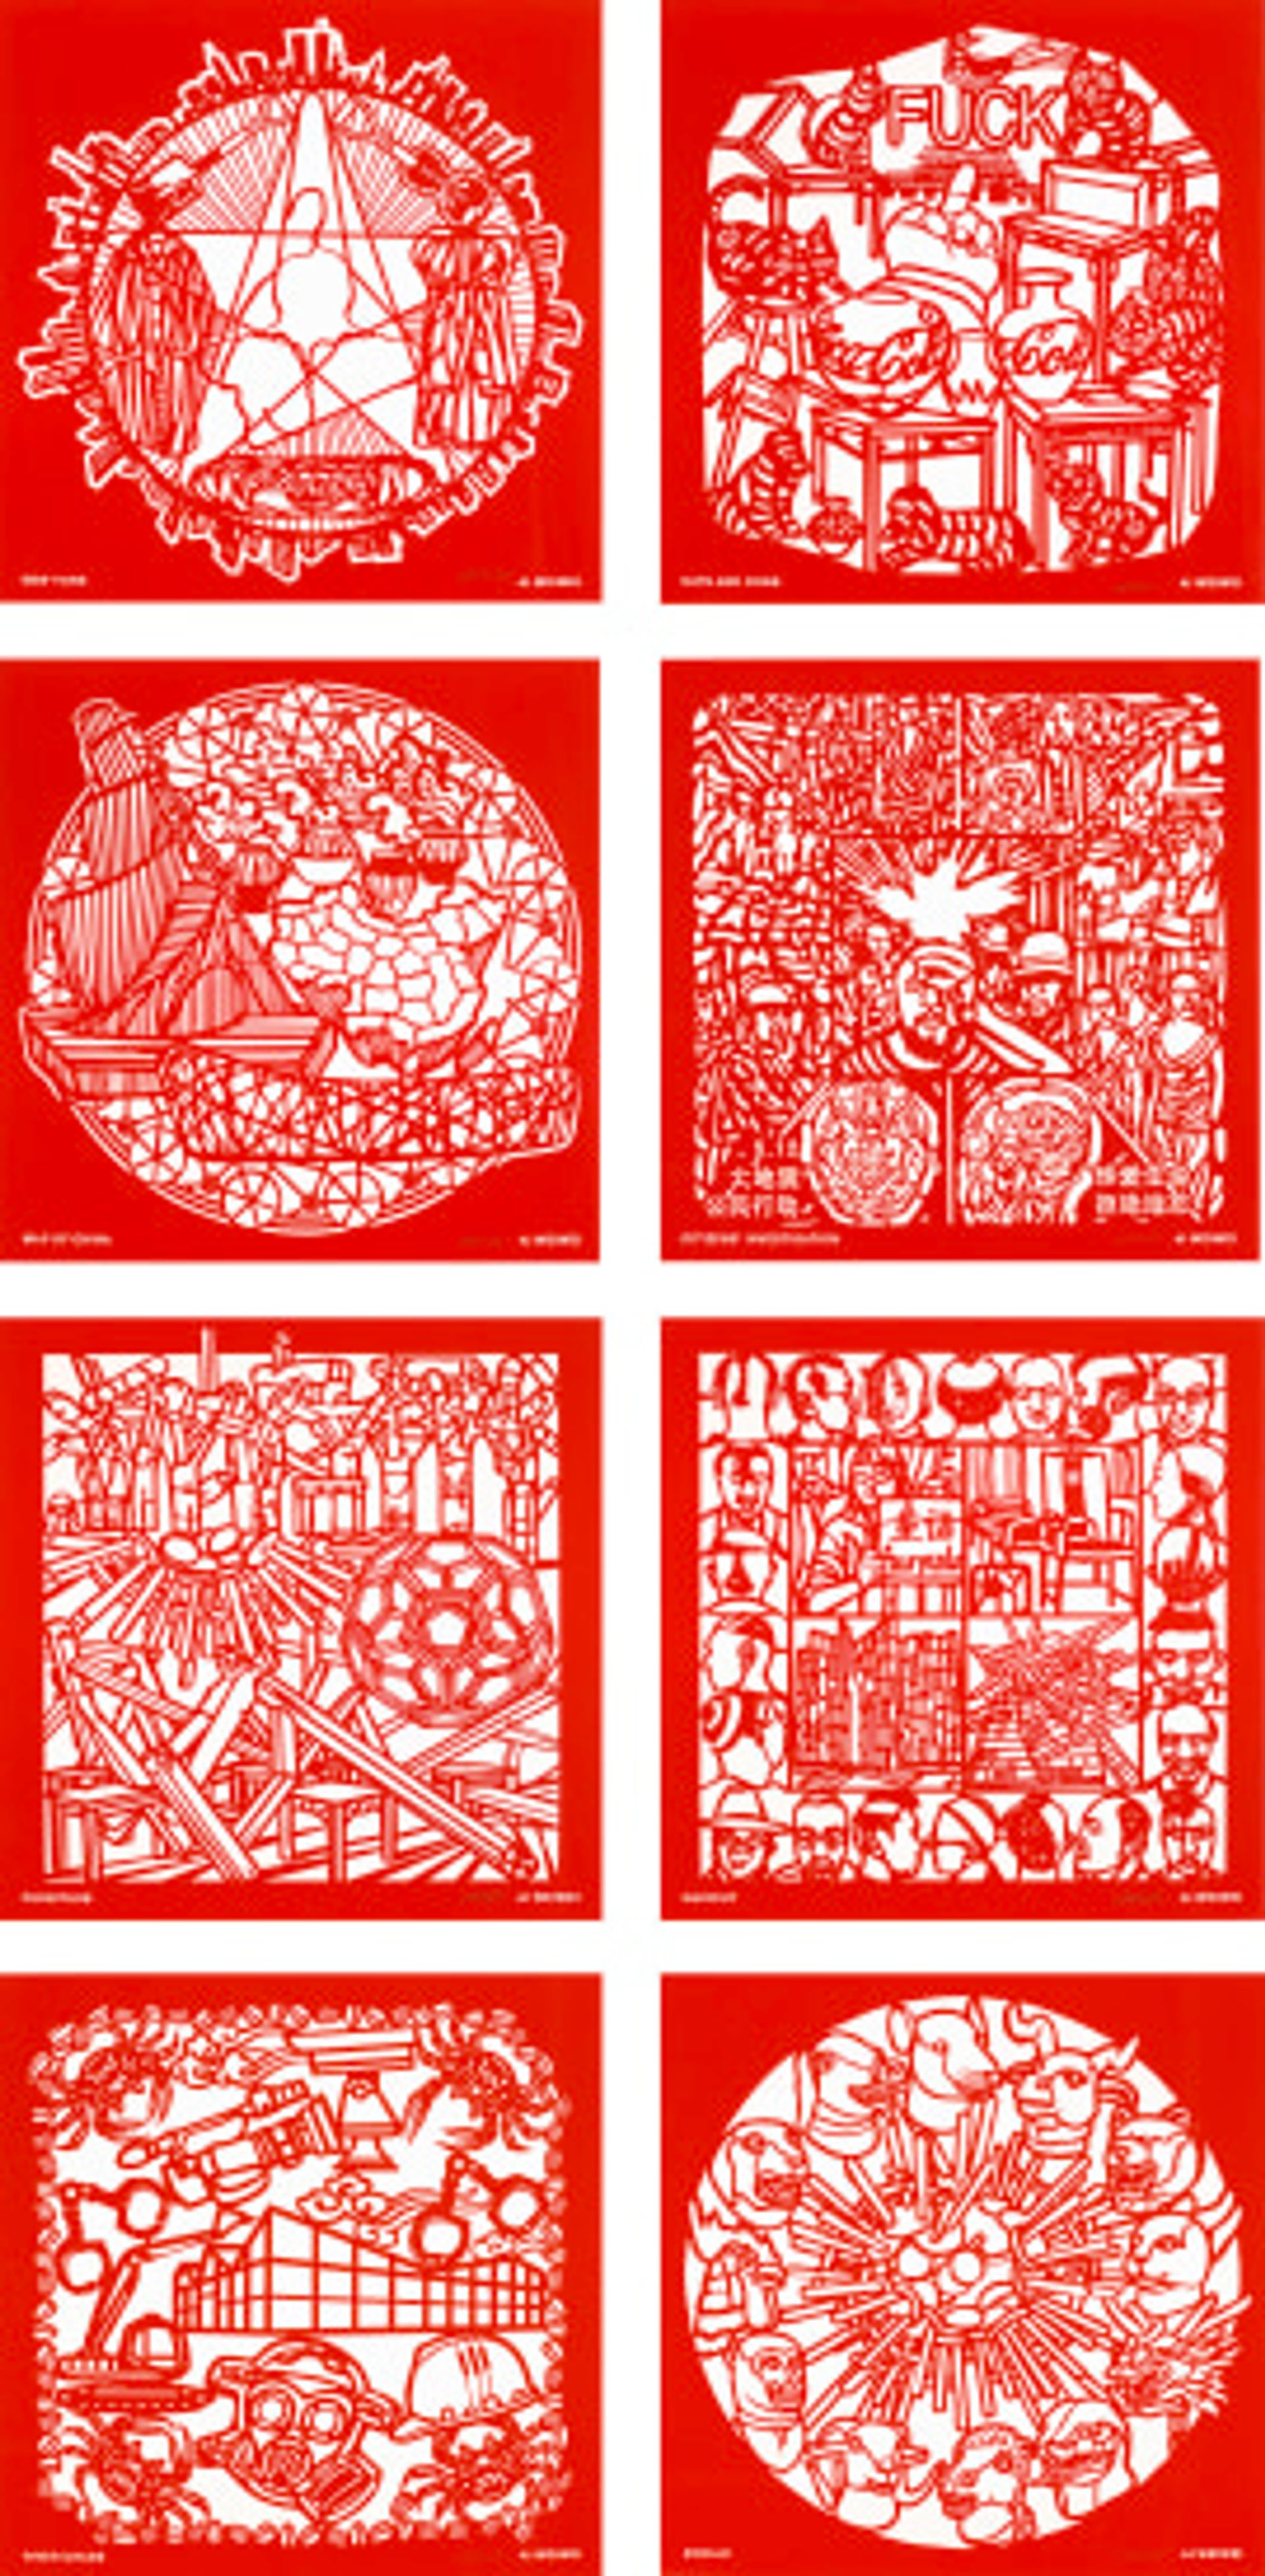 A series of eight red and white papercut prints comprising dense sketches and geometric shapes